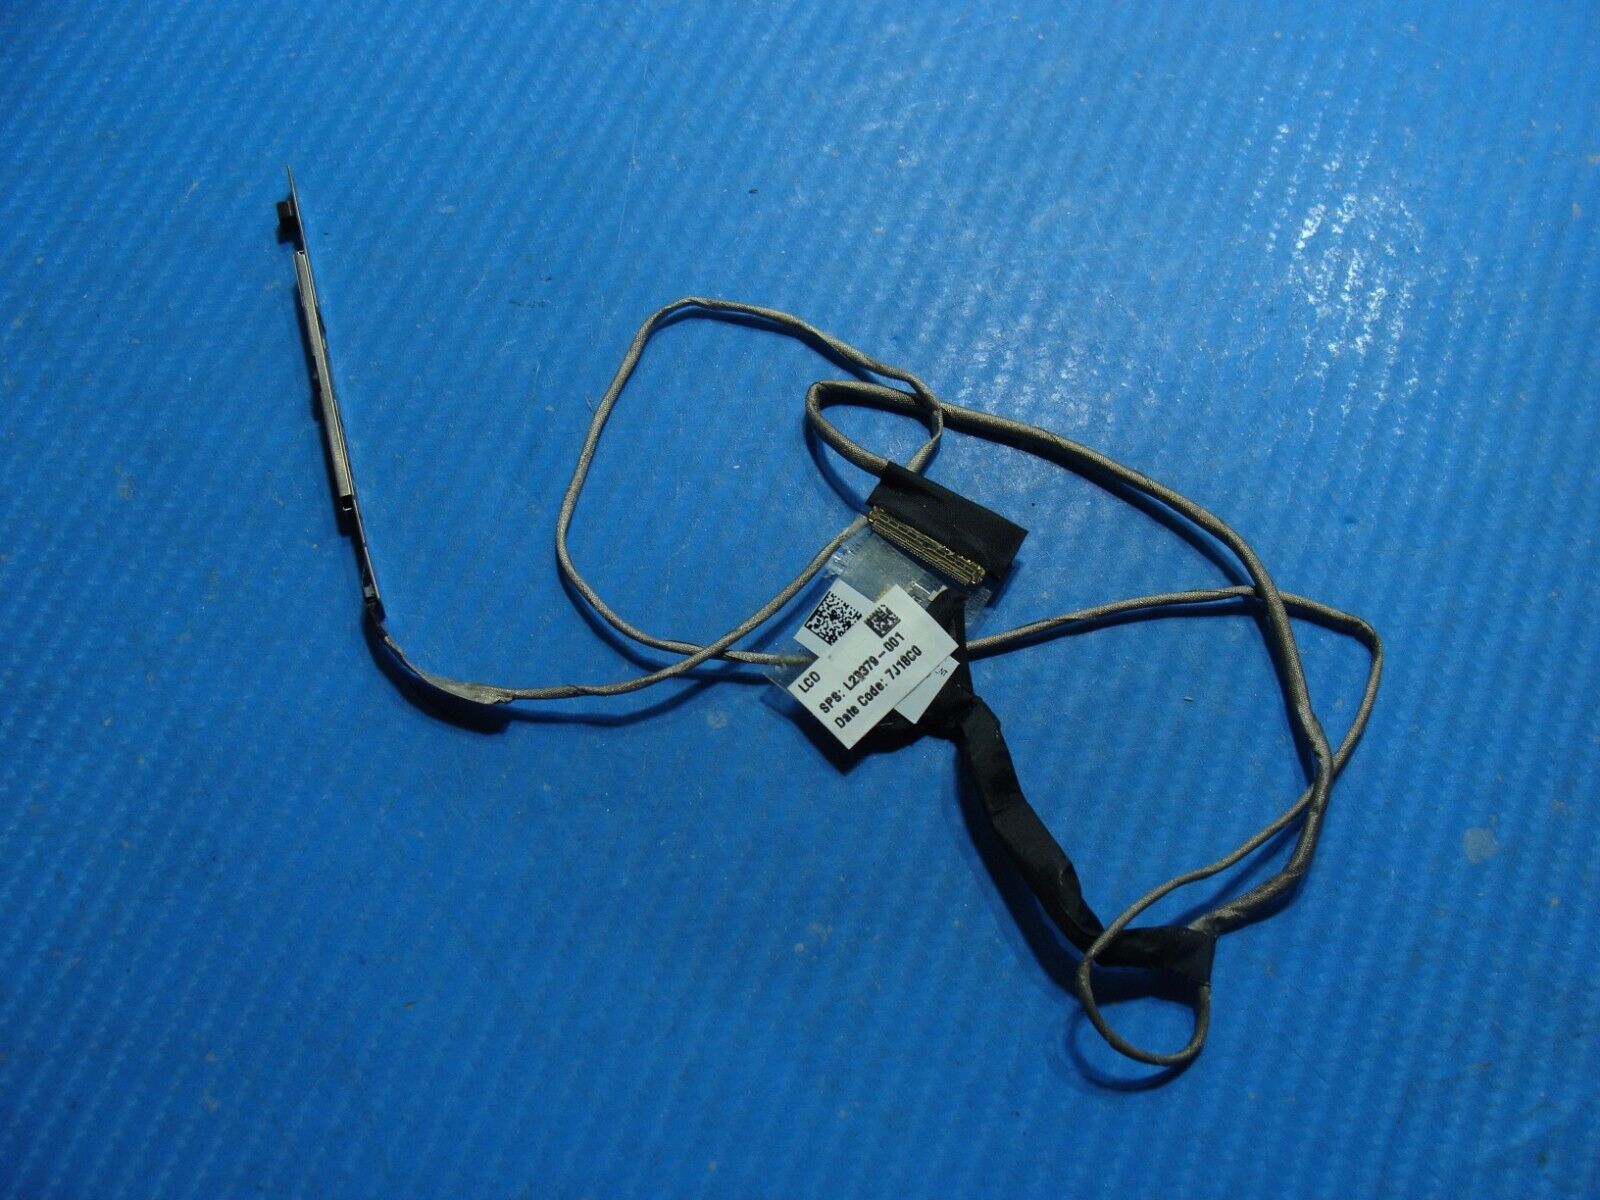 HP 15.6” 15-db0005dx Genuine Laptop LCD Video Cable w/WebCam L20379-001